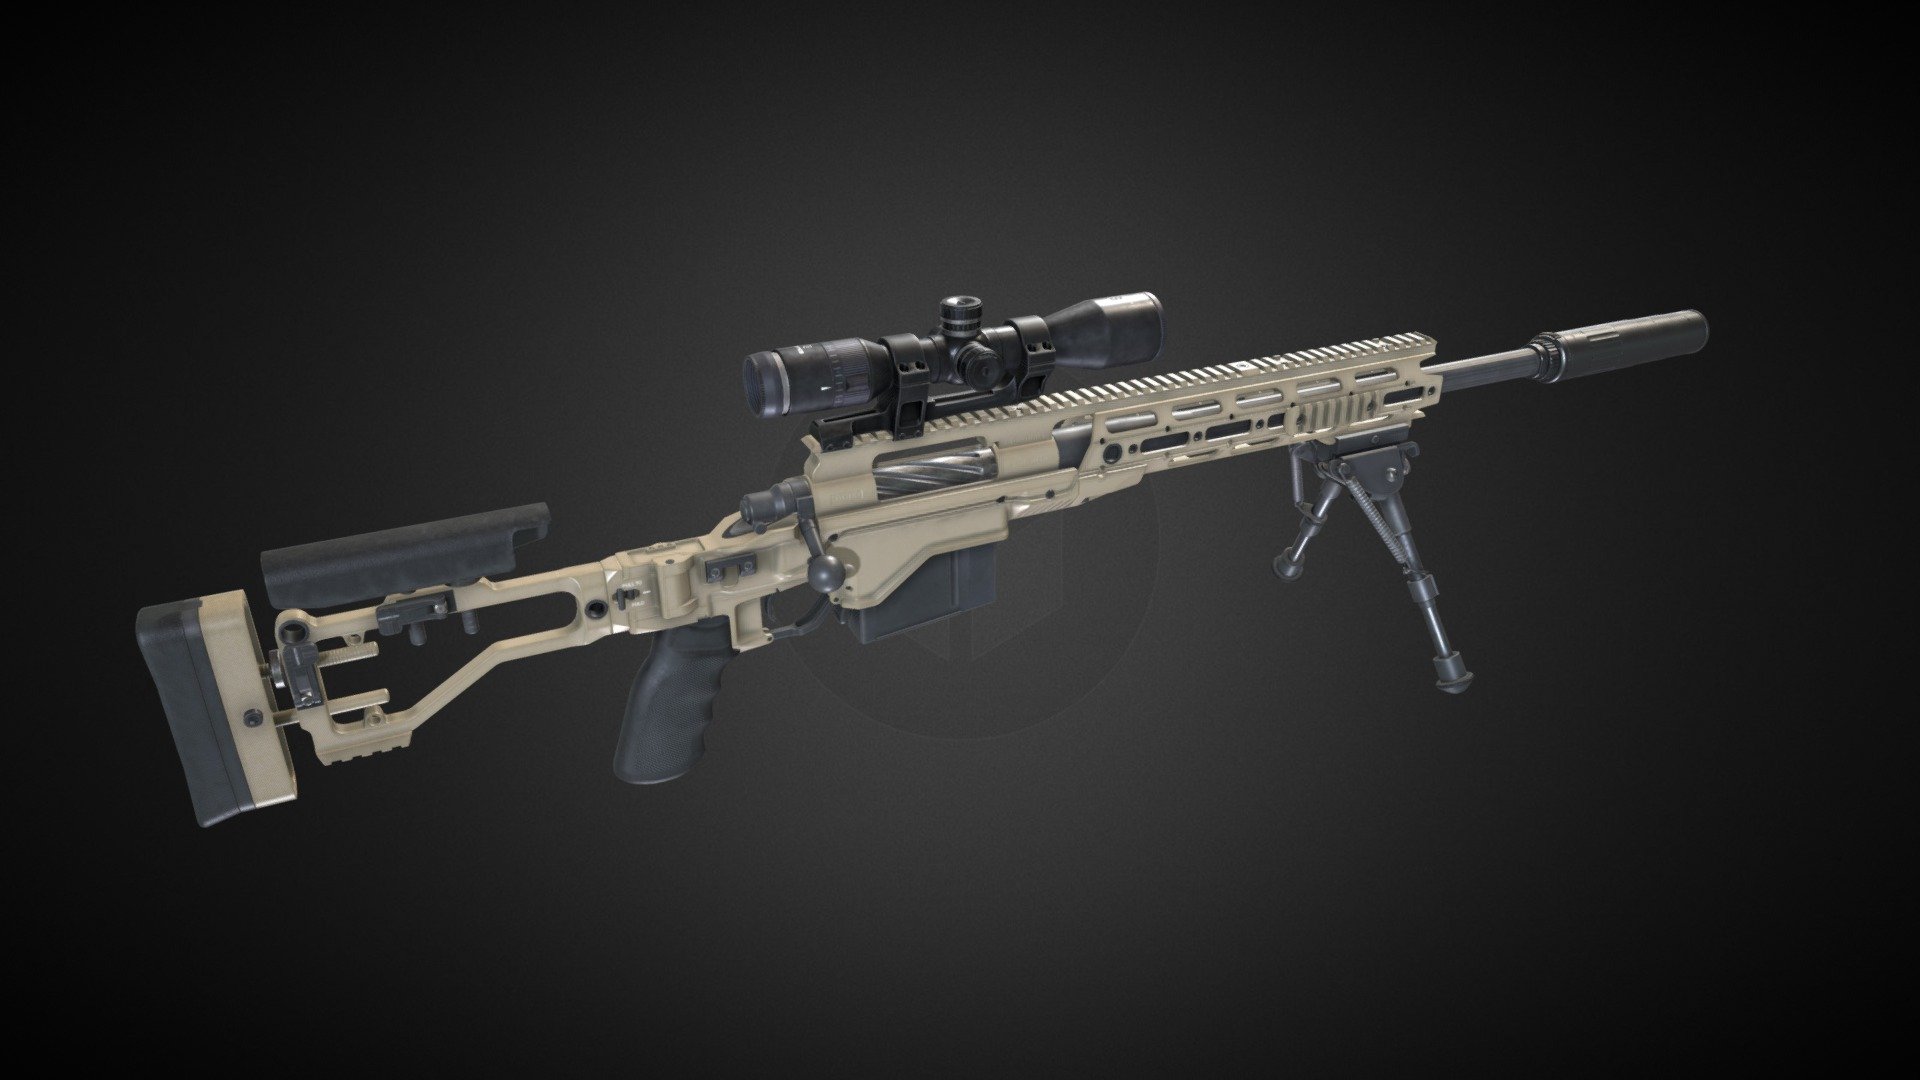 Rifle based on Remington Accessory Chassis System (RACS) contracted for USA SOCOM around 2013 by Surgeon.  

Model is rigged, but there is also version with separated parts.  

Rifle it self have 3 PBR Materials in 4K. Scope, bipod and suppressor have separated Materials. Black, FDE and tanodized/gold colors are included.

Verts: 30.6K / without addons: 21.5K

Tris: 60.4K / without addons: 42.8K  

Made in Blender.  

PS. For preview model I used 2K textures as due to all addons it would be tad big and heavy with all those 4K uncompressed textures 3d model